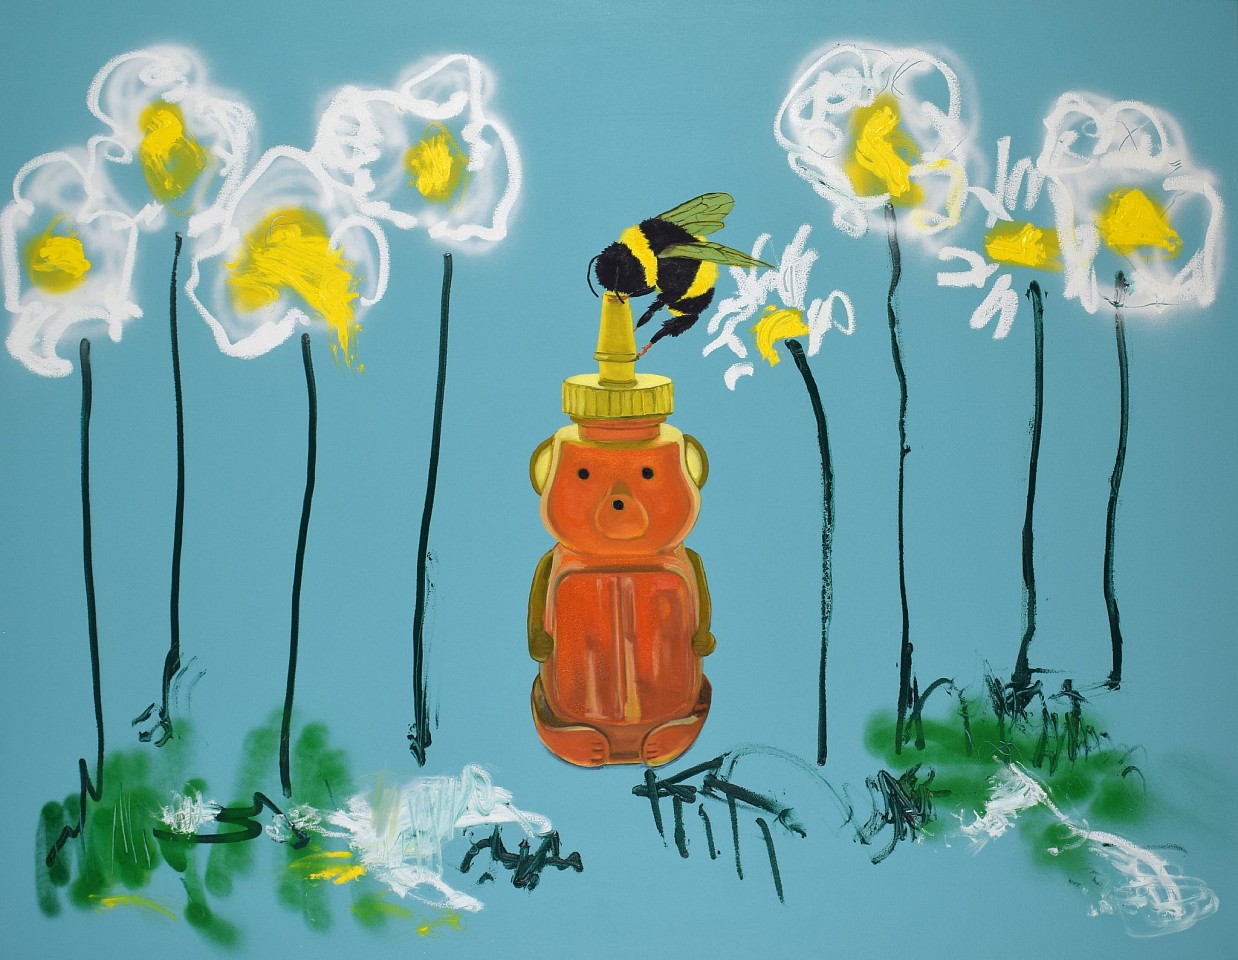 Adam S. Umbach, Honey Bear with Mr. Bee, 2021
mixed media on canvas, 54 x 70 in. (137.2 x 177.8 cm)
AU221208